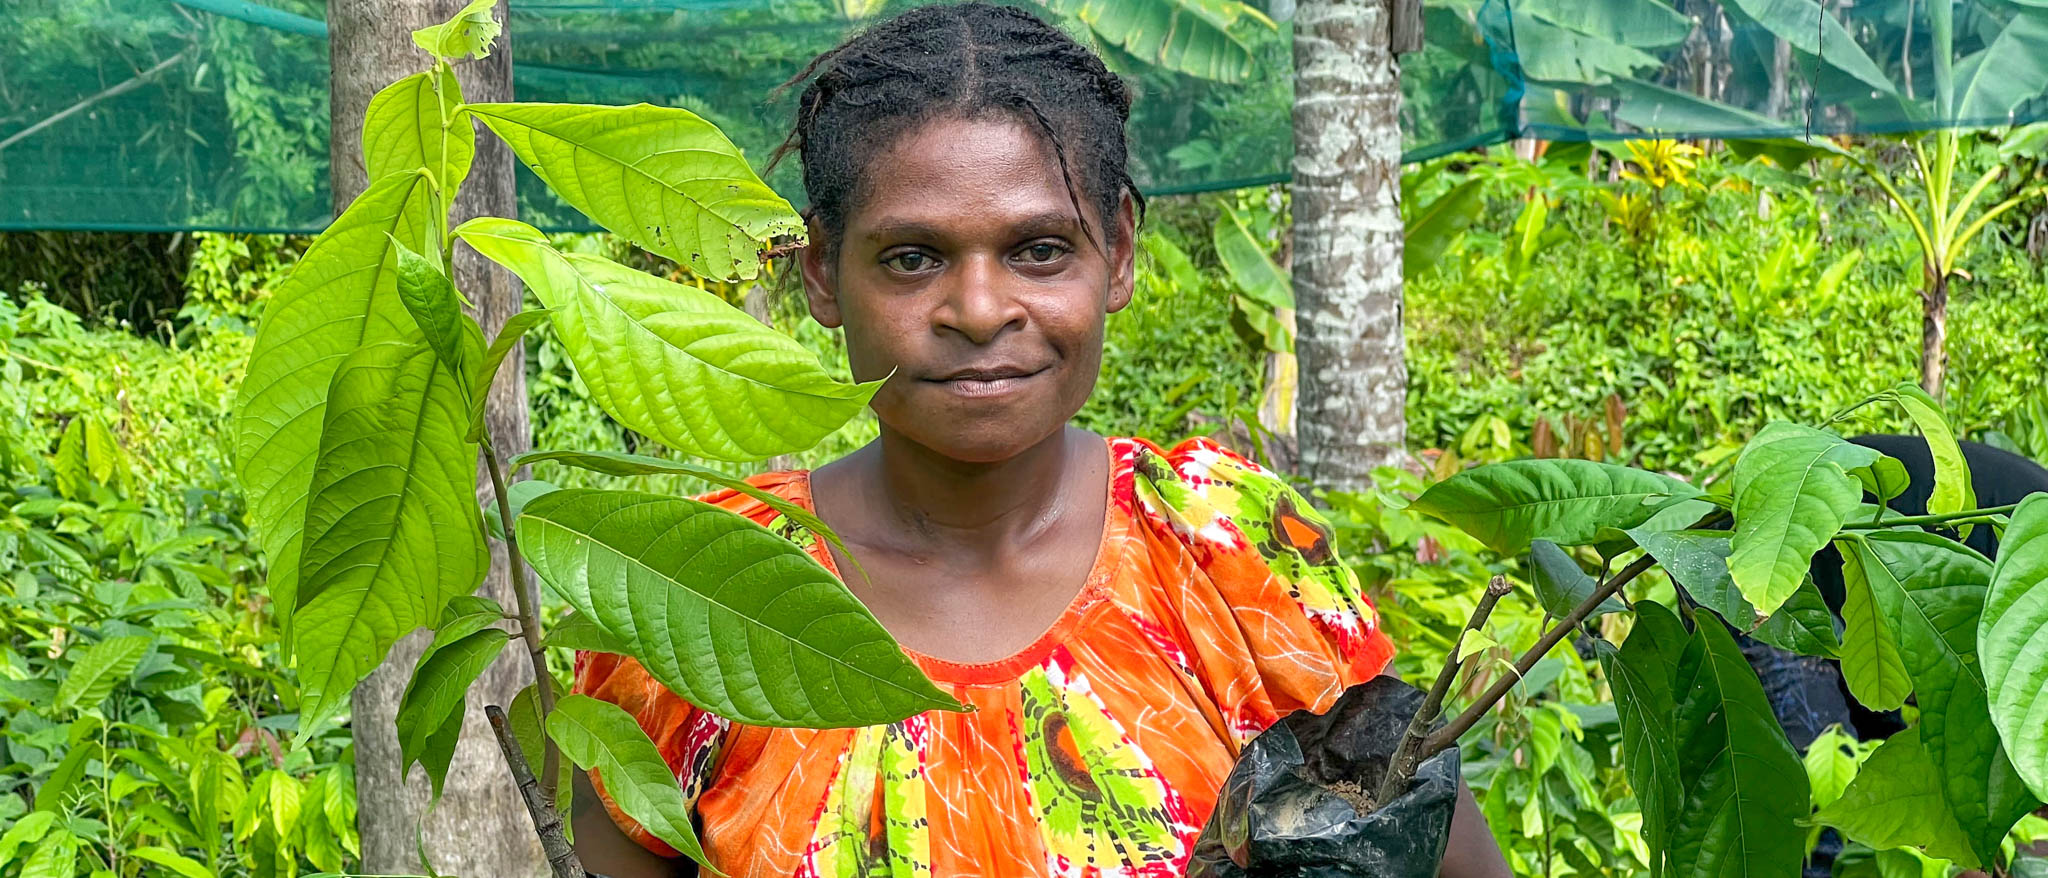 A young cocoa farmer lady, supported by the EU-STREIT PNG Programme